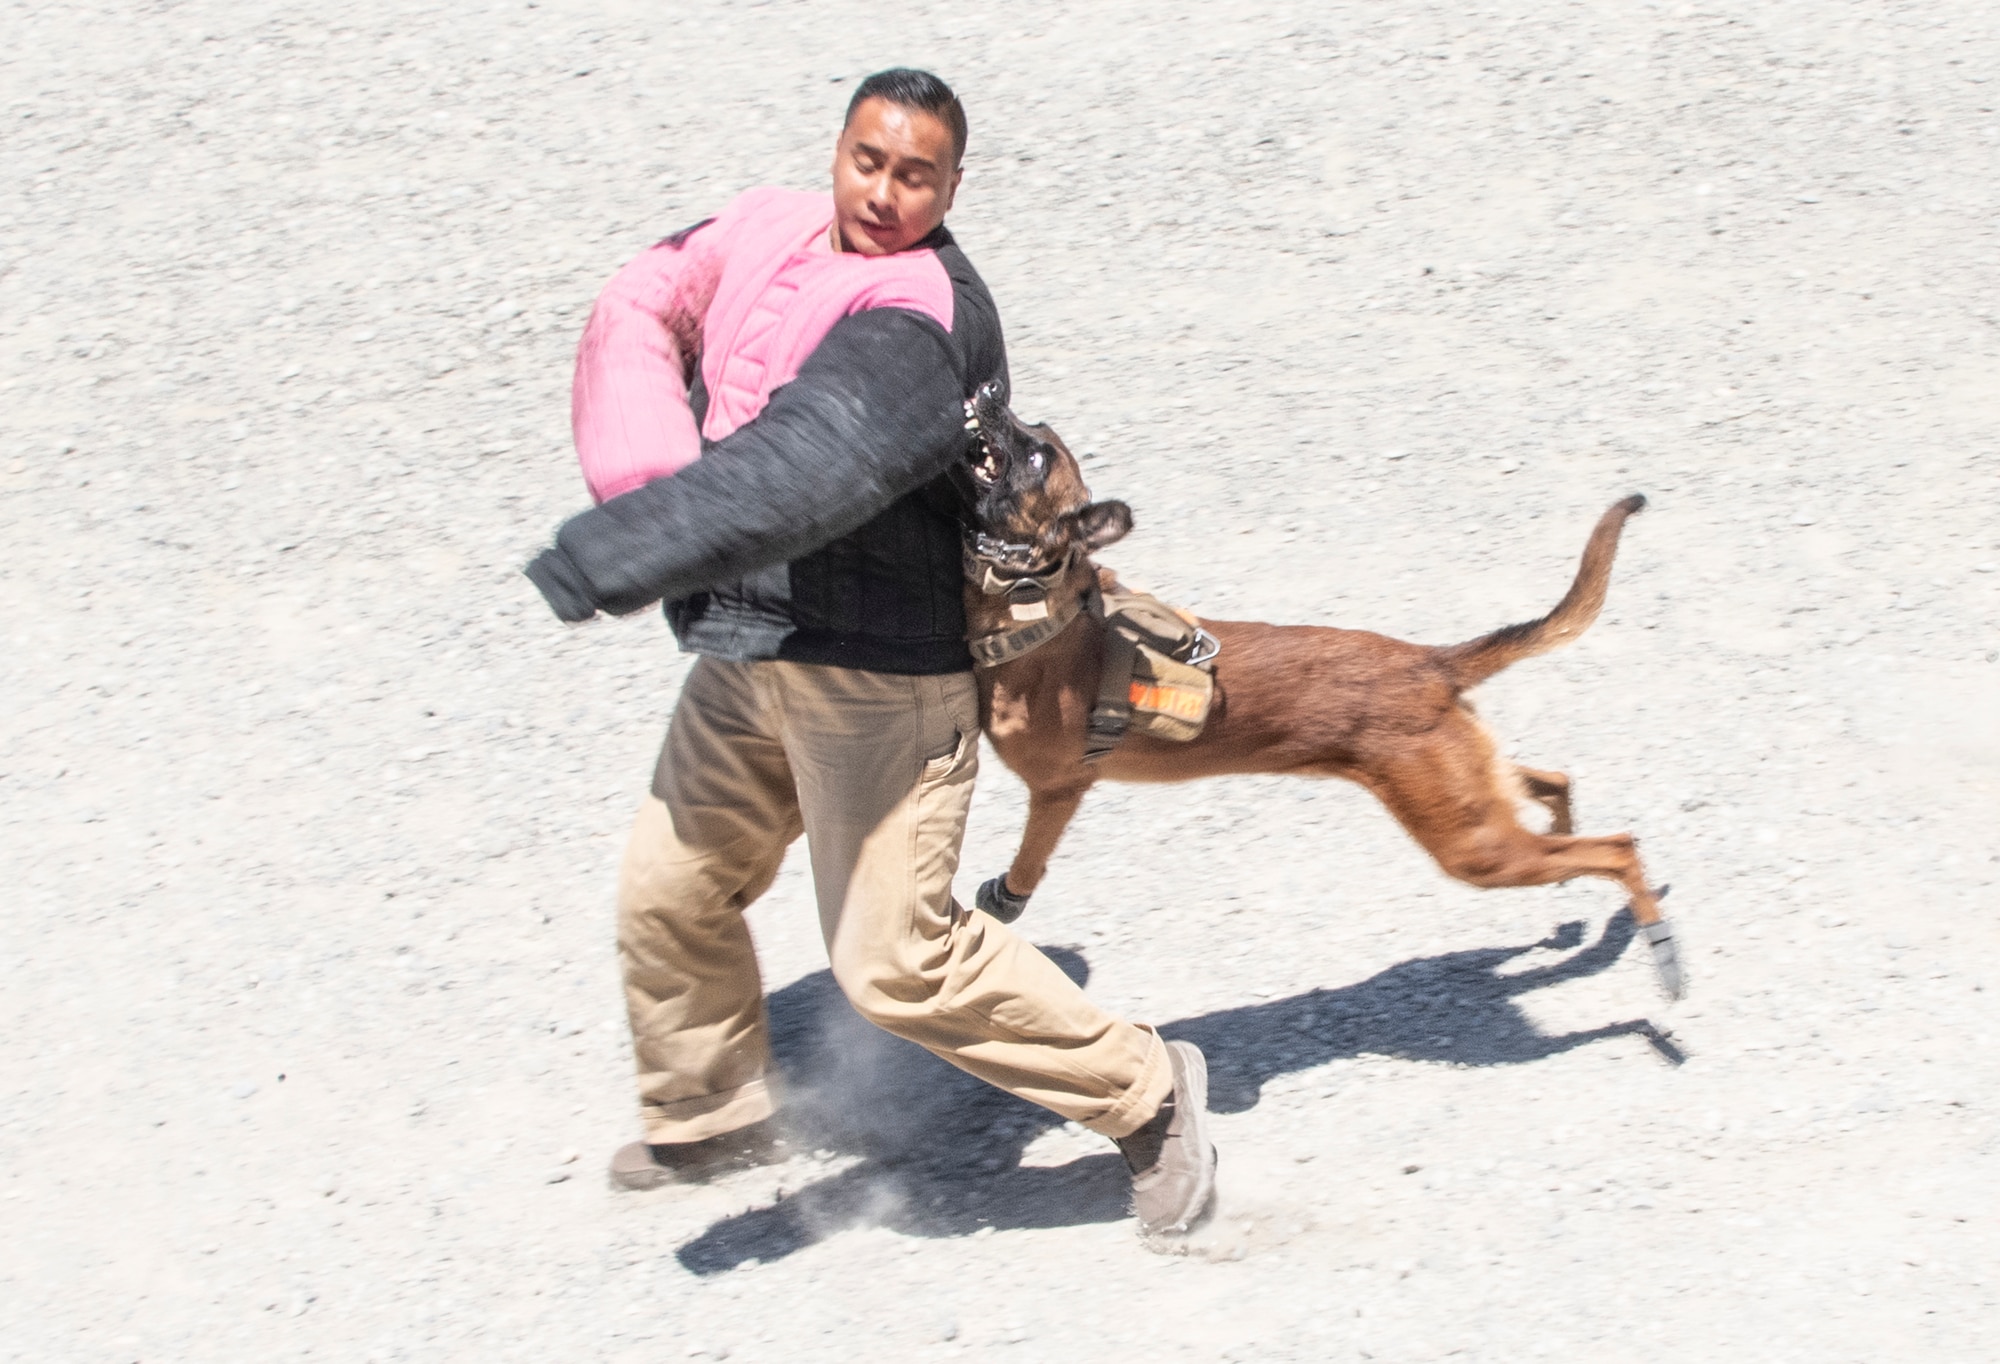 U.S. Air Force Staff Sgt. Roniel Tolentino, 60th Security Forces Squadron military working dog handler, is apprehended by MWD Aarapaho during a training session June 24, 2021, at Travis Air Force Base, California. Military working dogs are used in patrol, drug and explosive detection and specialized mission functions for the Department of Defense. (U.S. Air Force photo by Heide Couch)